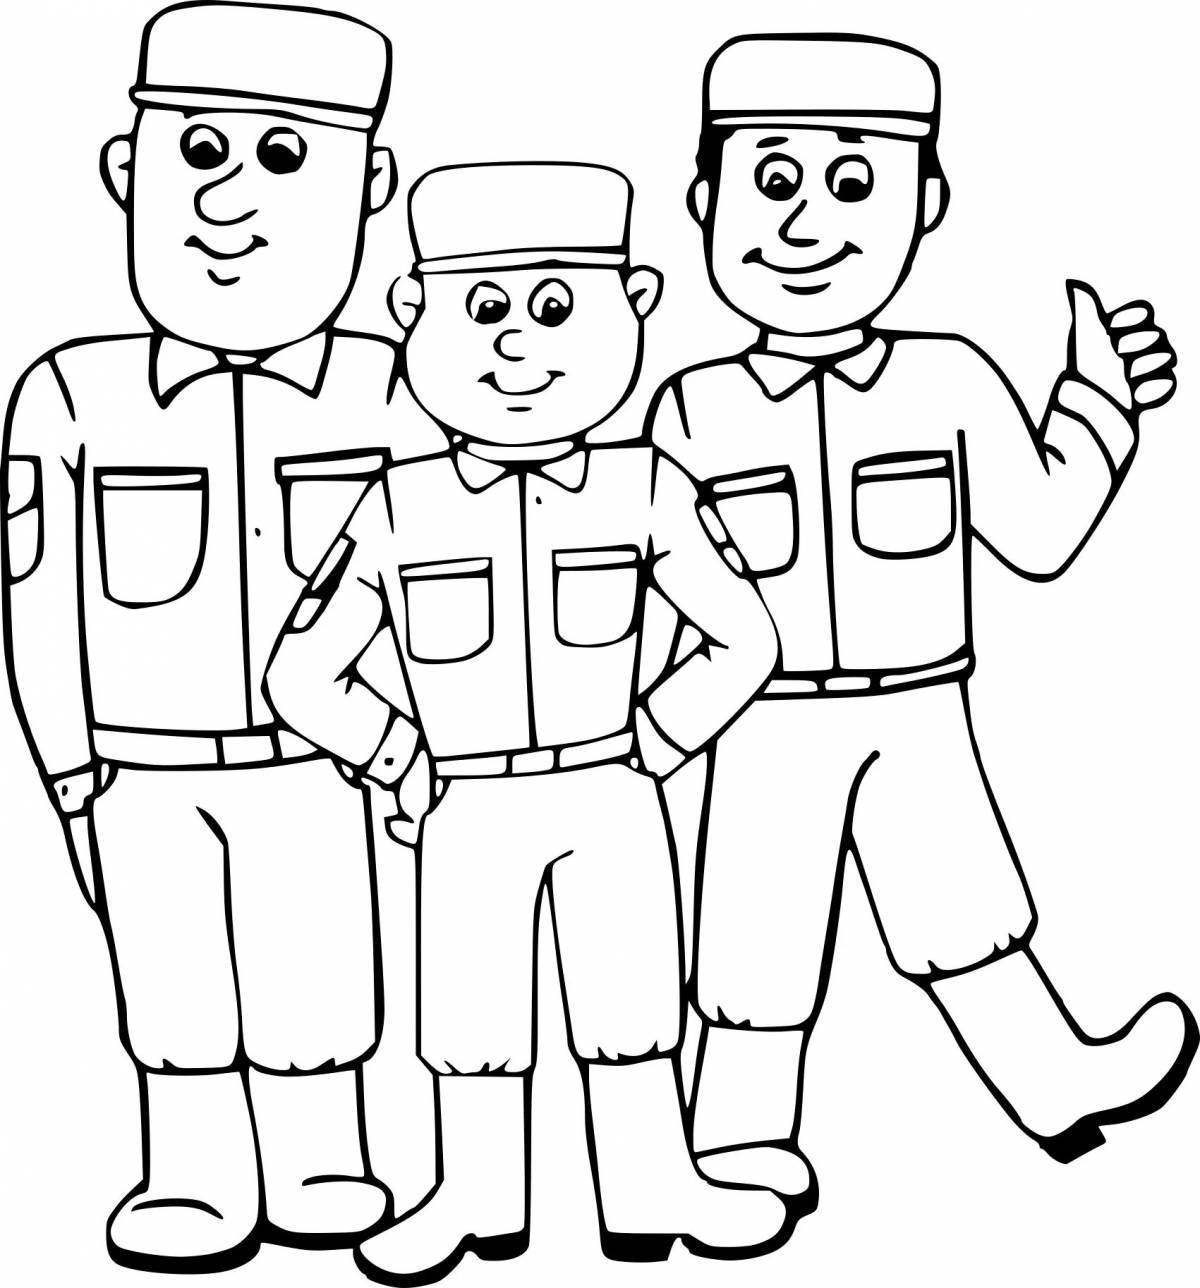 Dazzling soldier coloring pages for kids